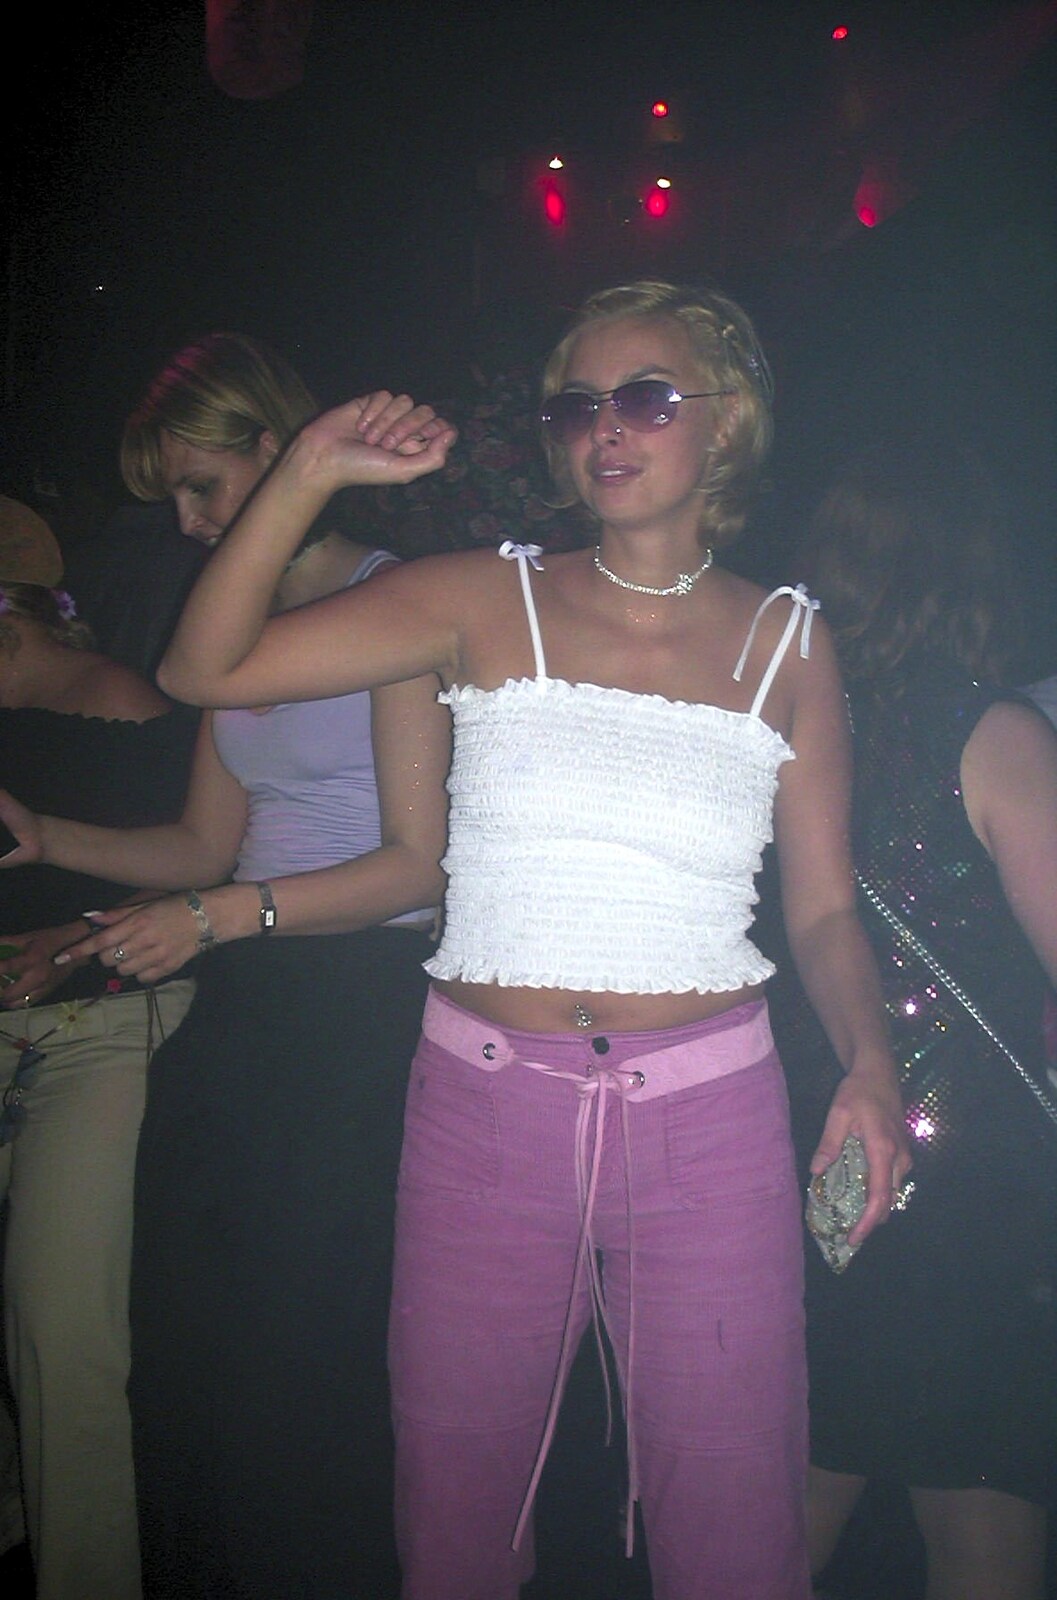 Wendy dances from 3G Lab's Carwash Nightclub by Limo, London - 27th April 2002